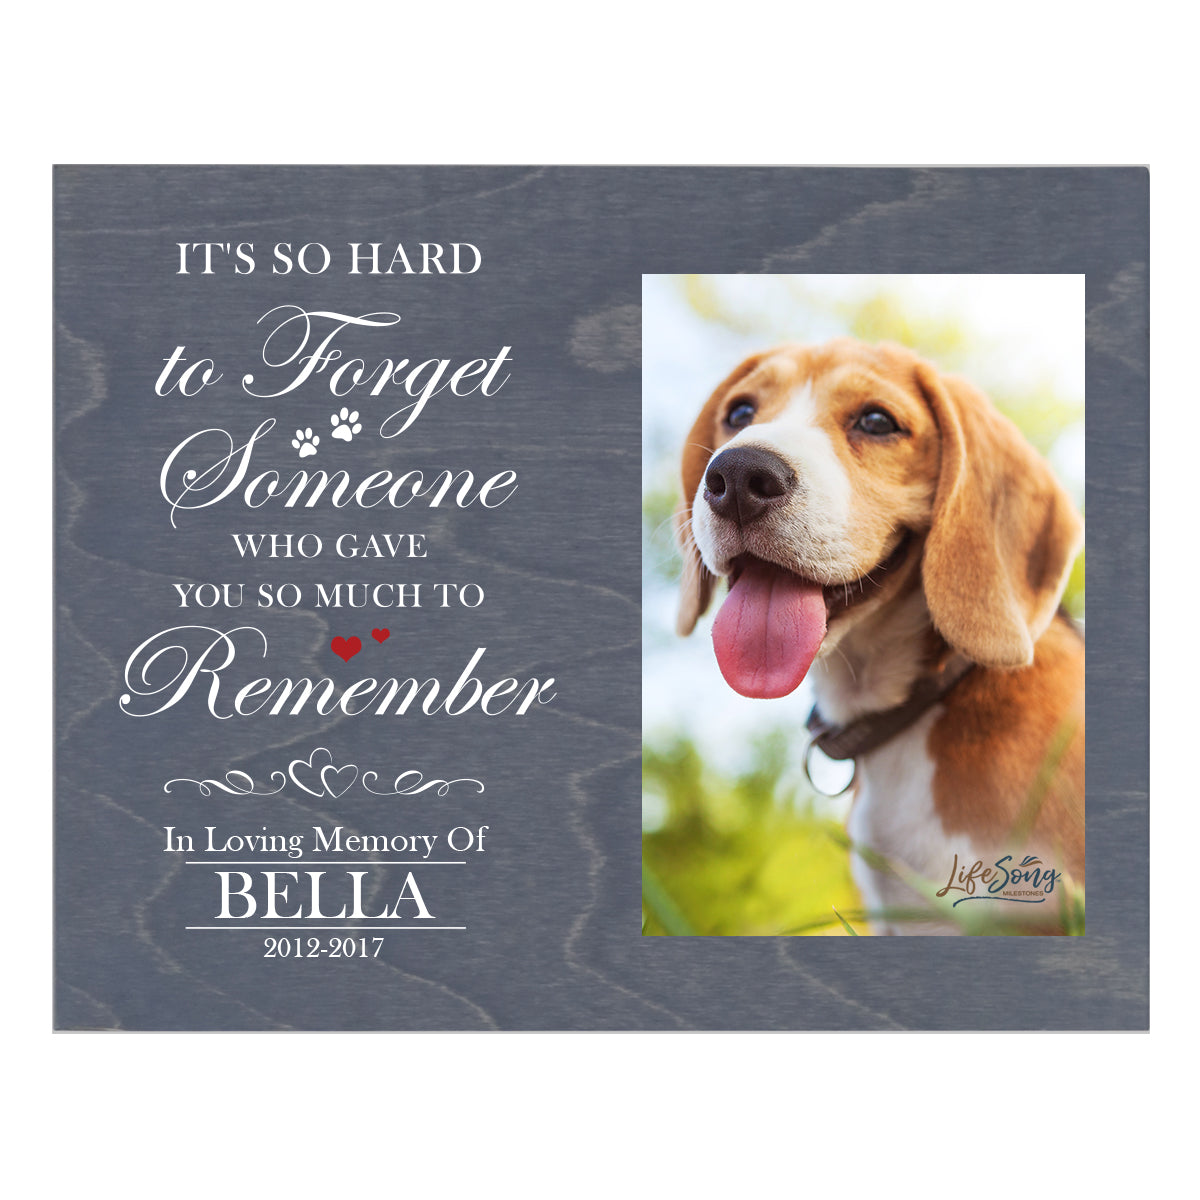 Pet Memorial Photo Wall Plaque Décor - It's So Hard To Forget